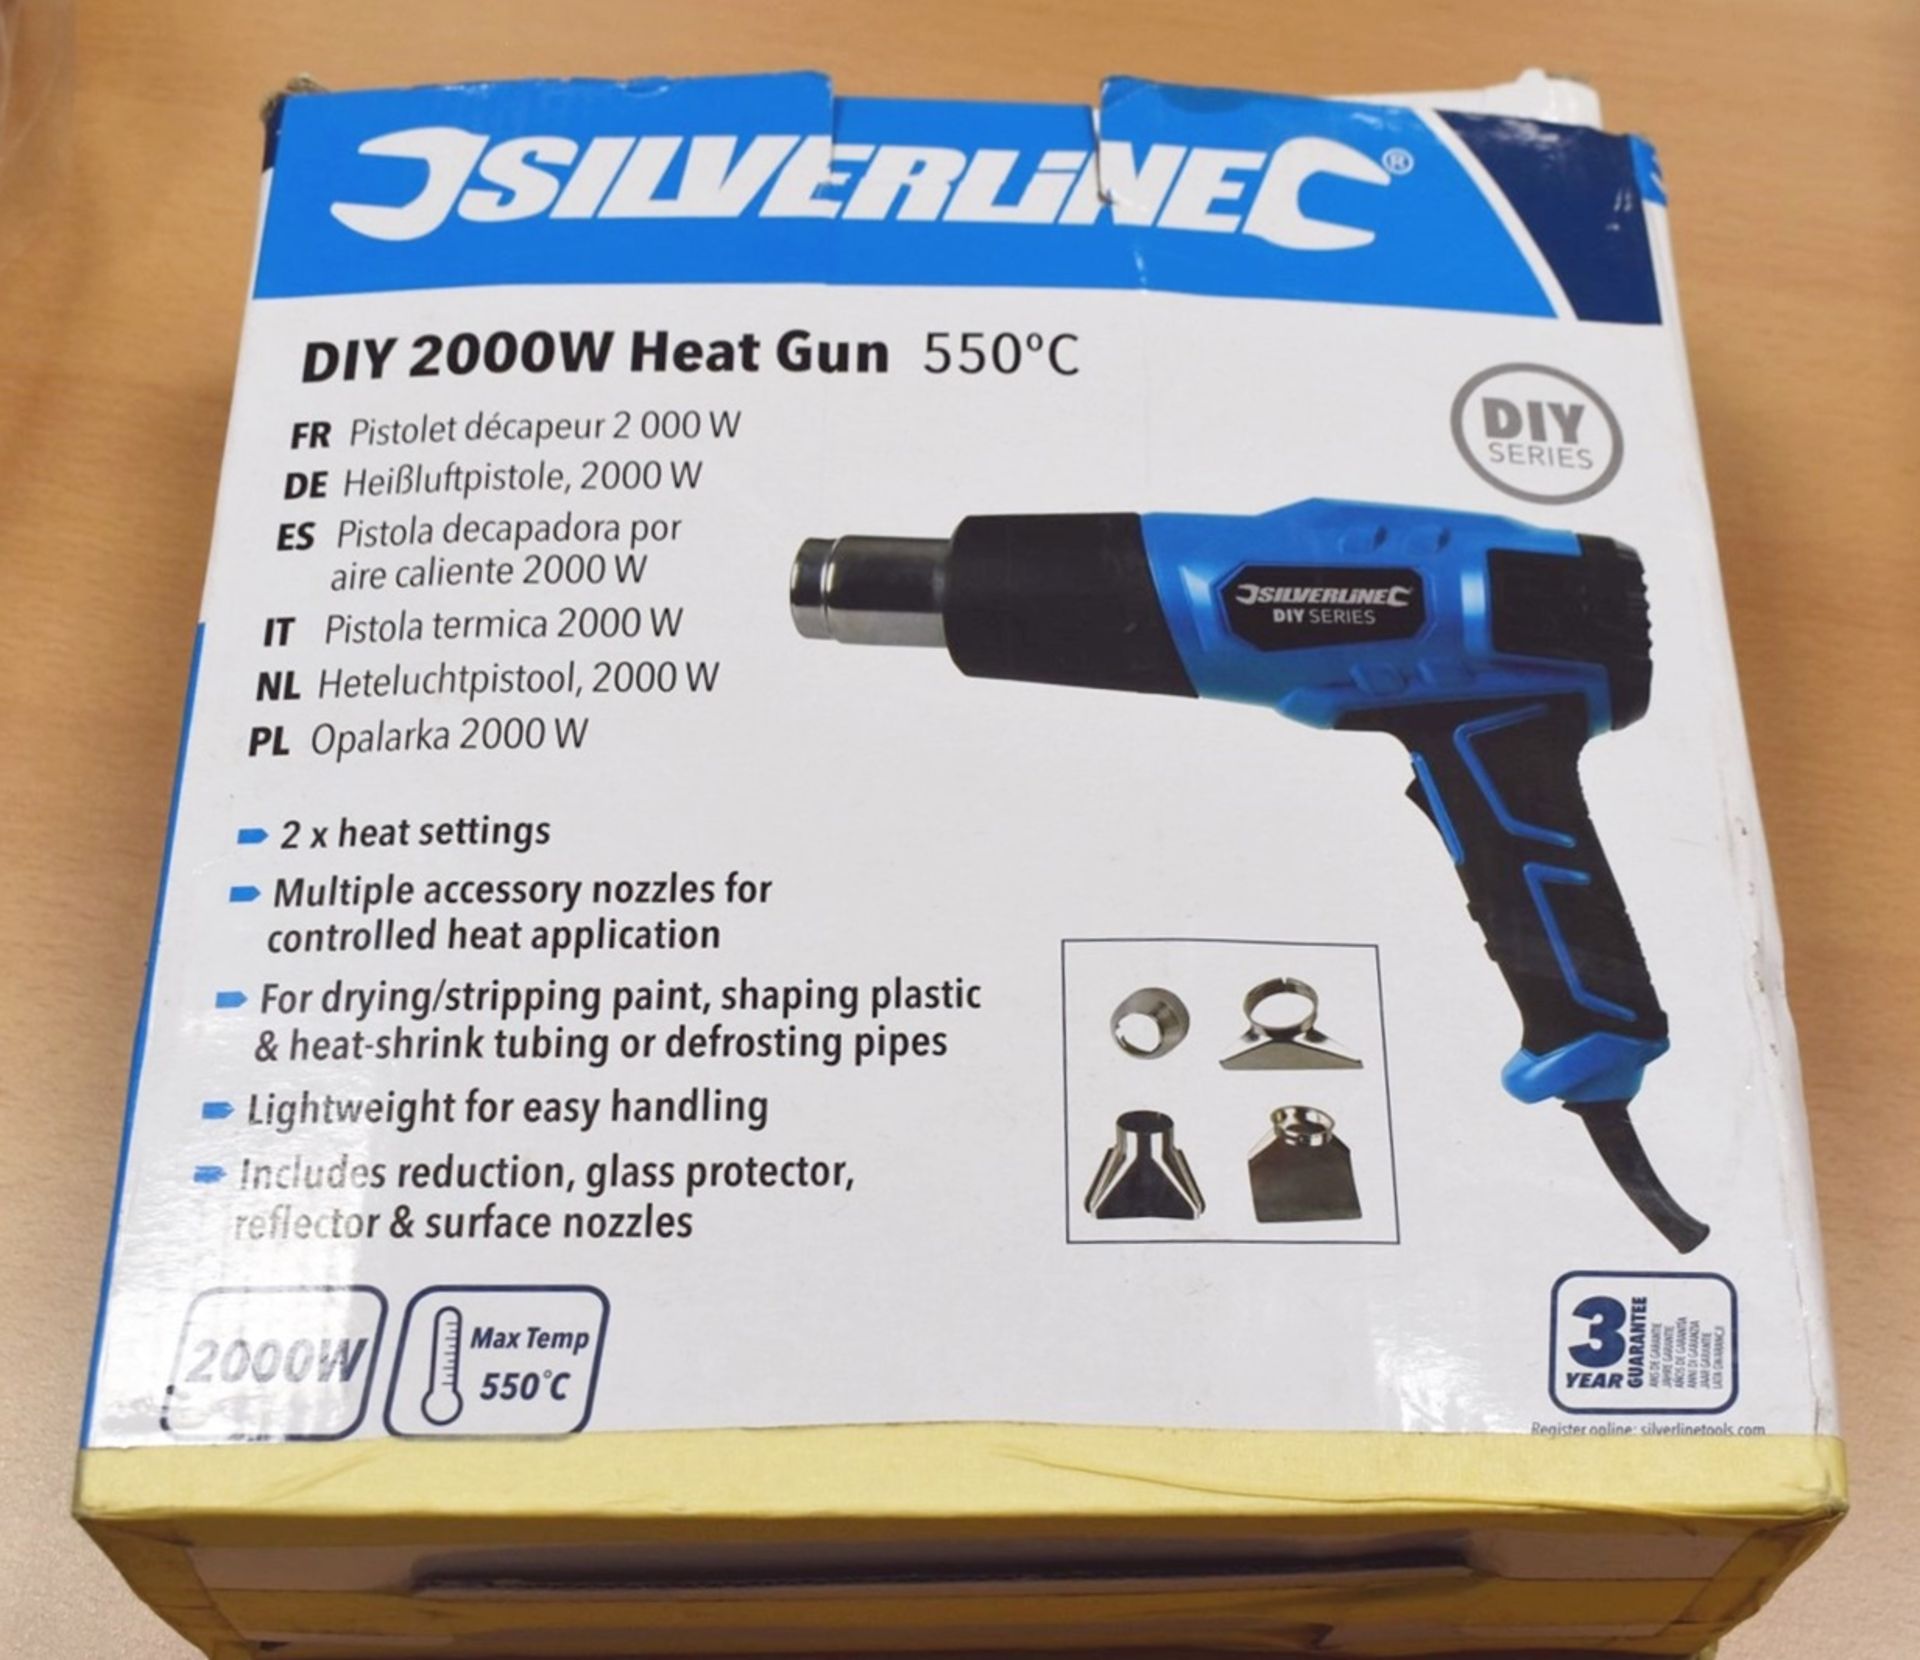 1 x Silverline DIY 200w 550c Heat Gun - Boxed With Accessories - Image 2 of 6